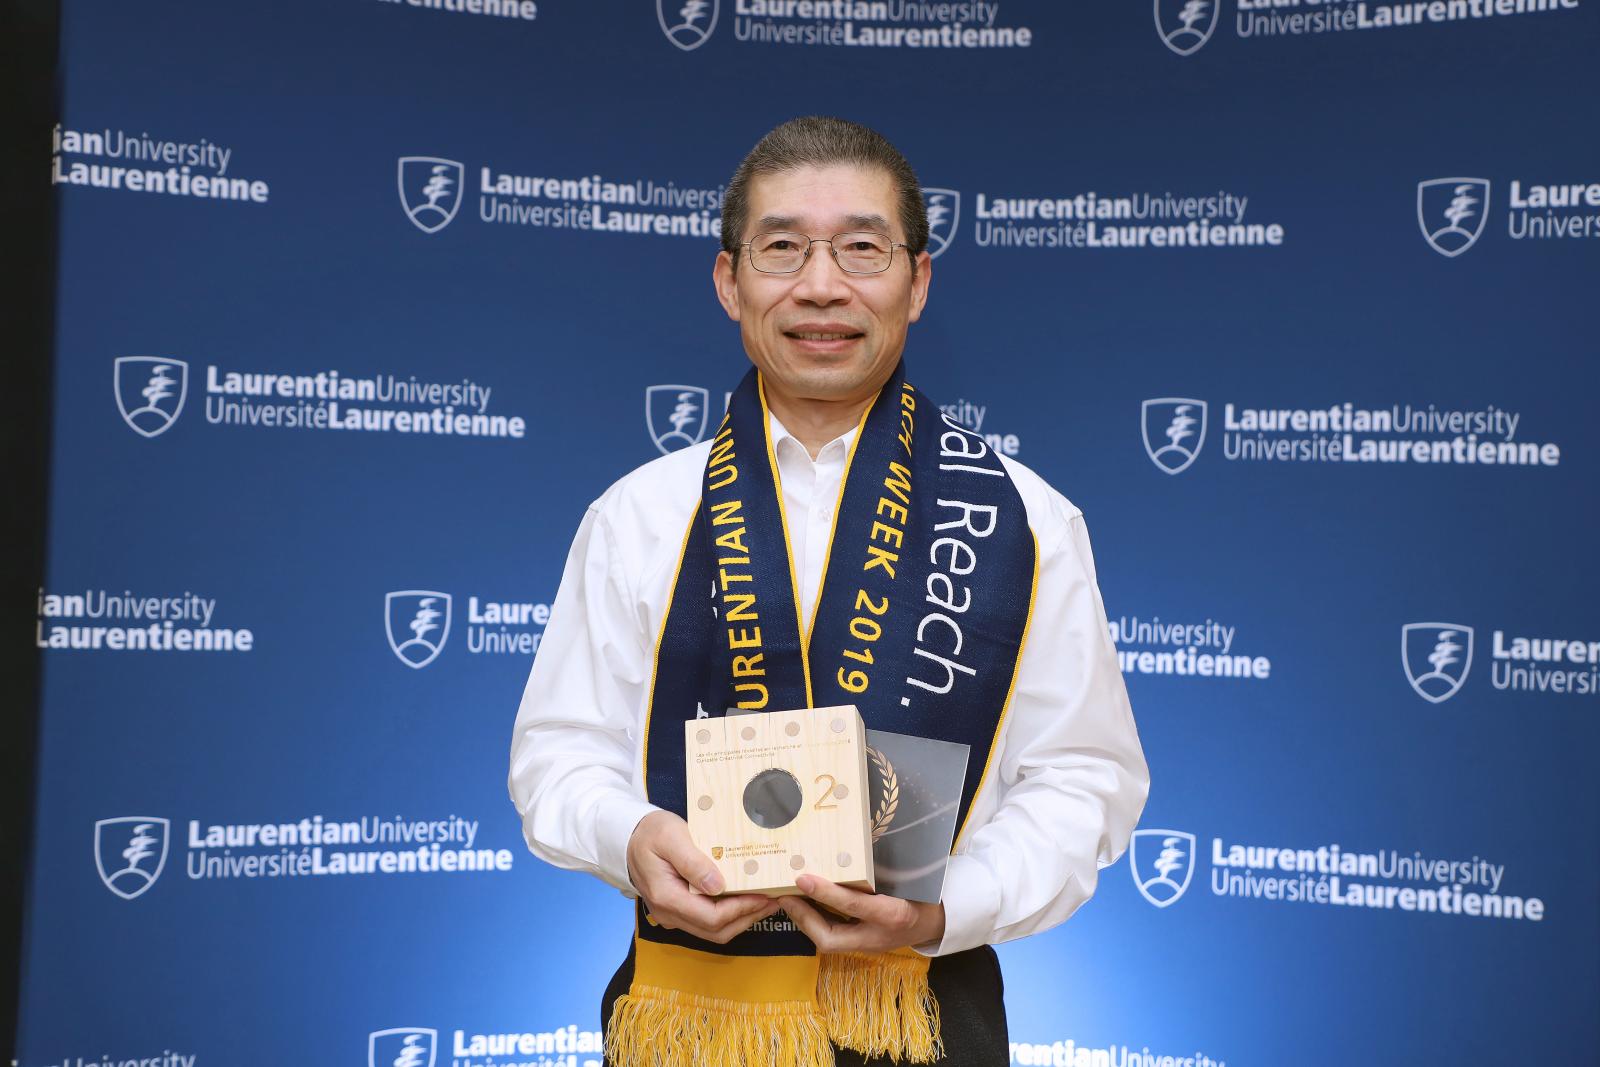 Dr. Ming Cai who received the 2nd place award.